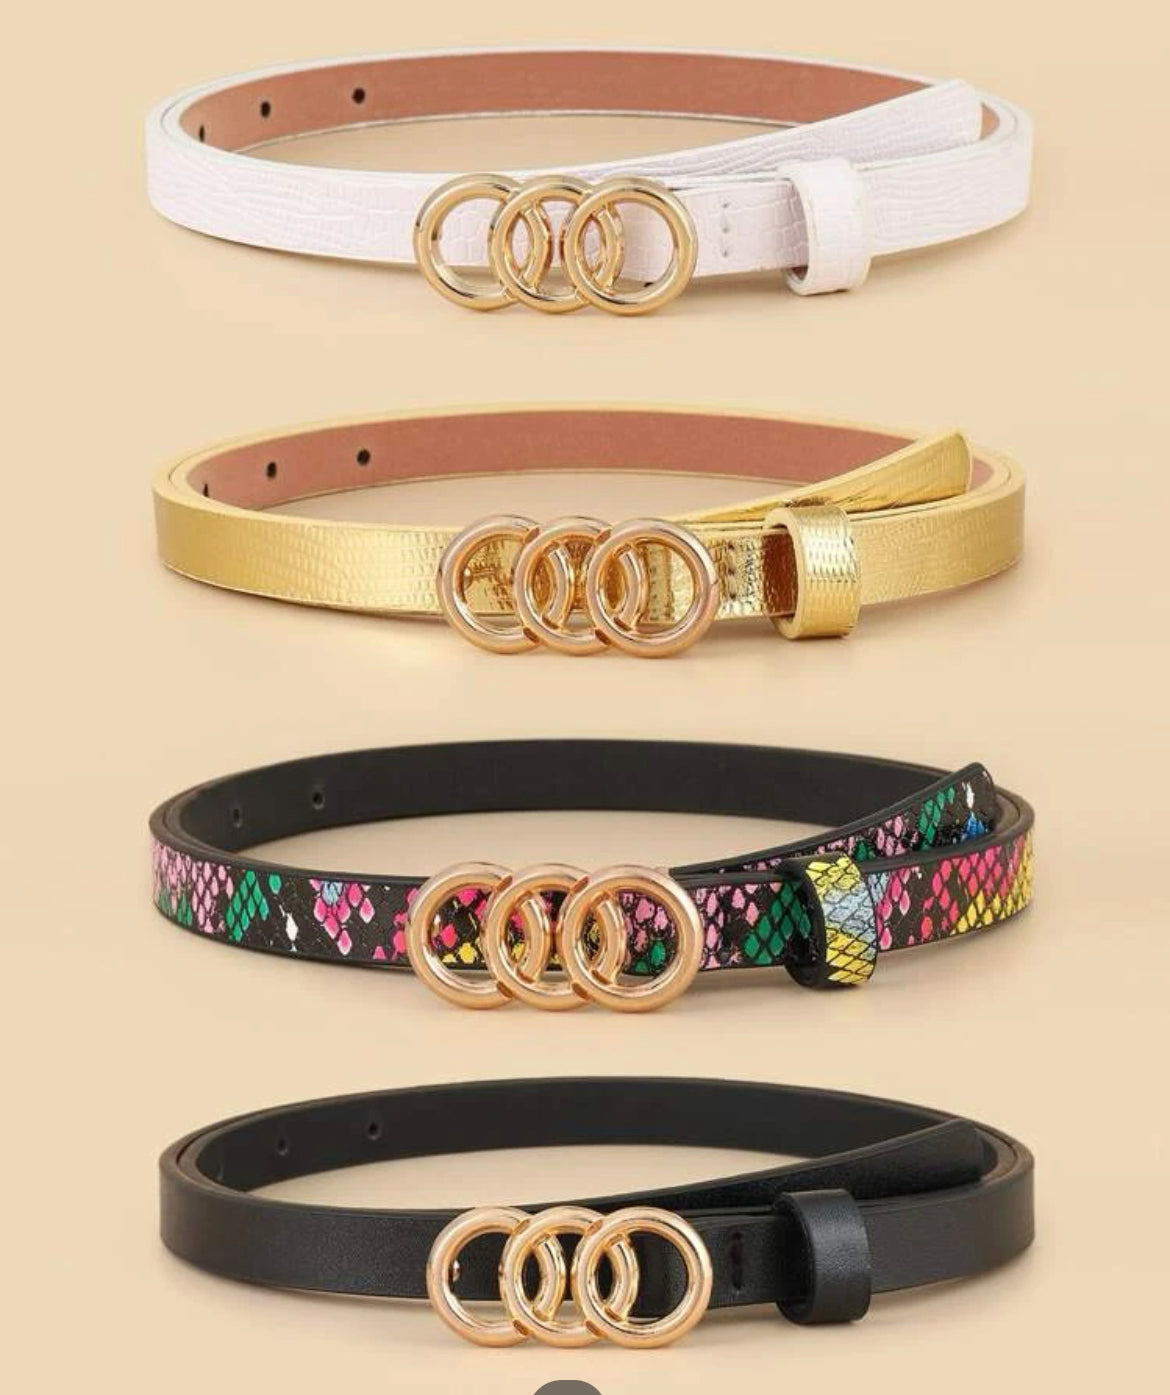 four Triple Circle Buckle Belt with Punch Tool Leather Belts in white, gold, multicolored snake skin, black